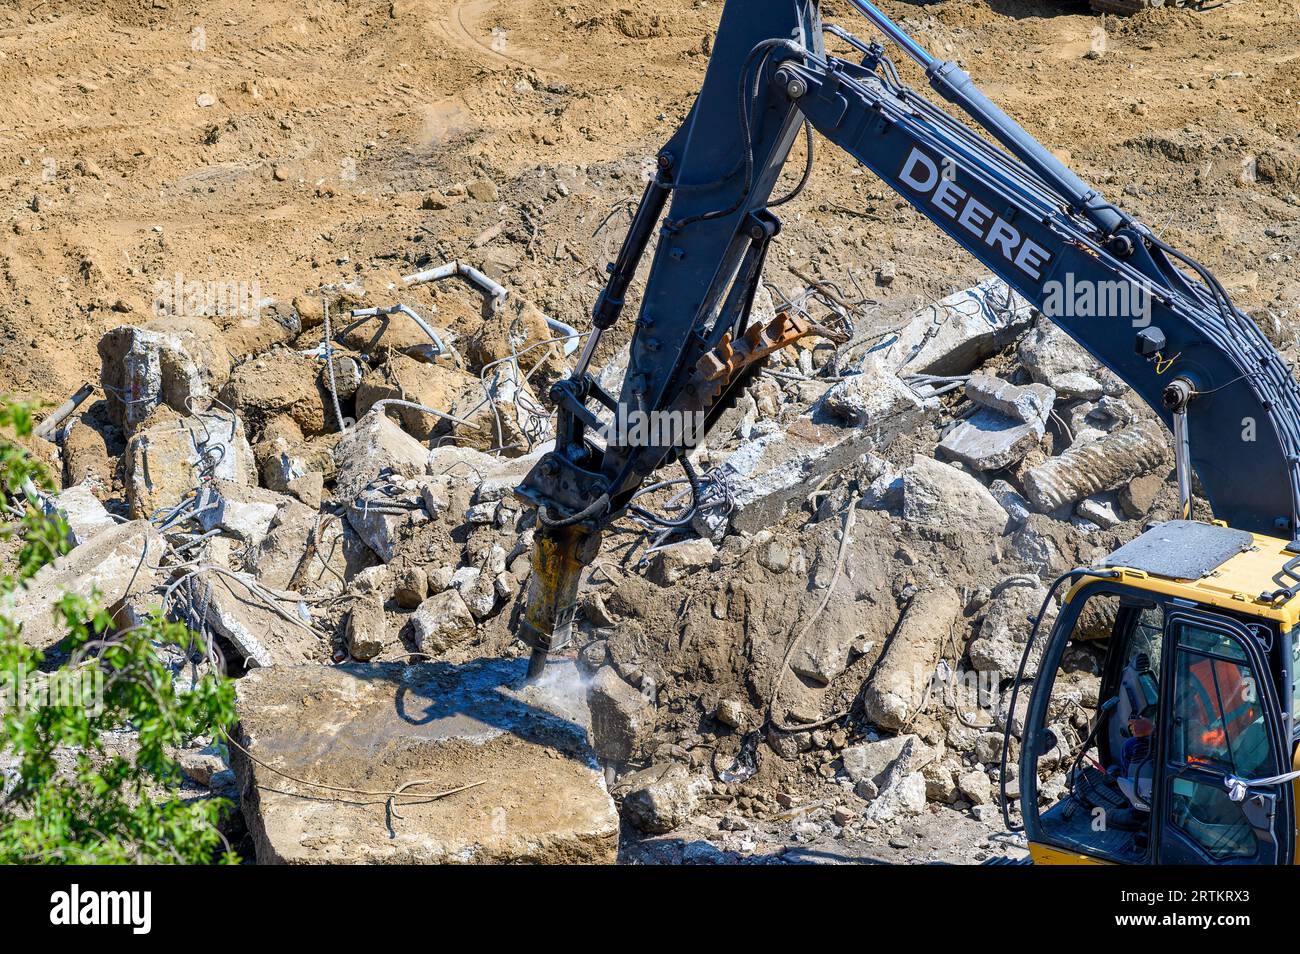 NEW ORLEANS, LA, USA - SEPTEMBER 13, 2023: John Deere excavator with a hydraulic hammer attachment breaks up a concrete slab at a demolition site Stock Photo